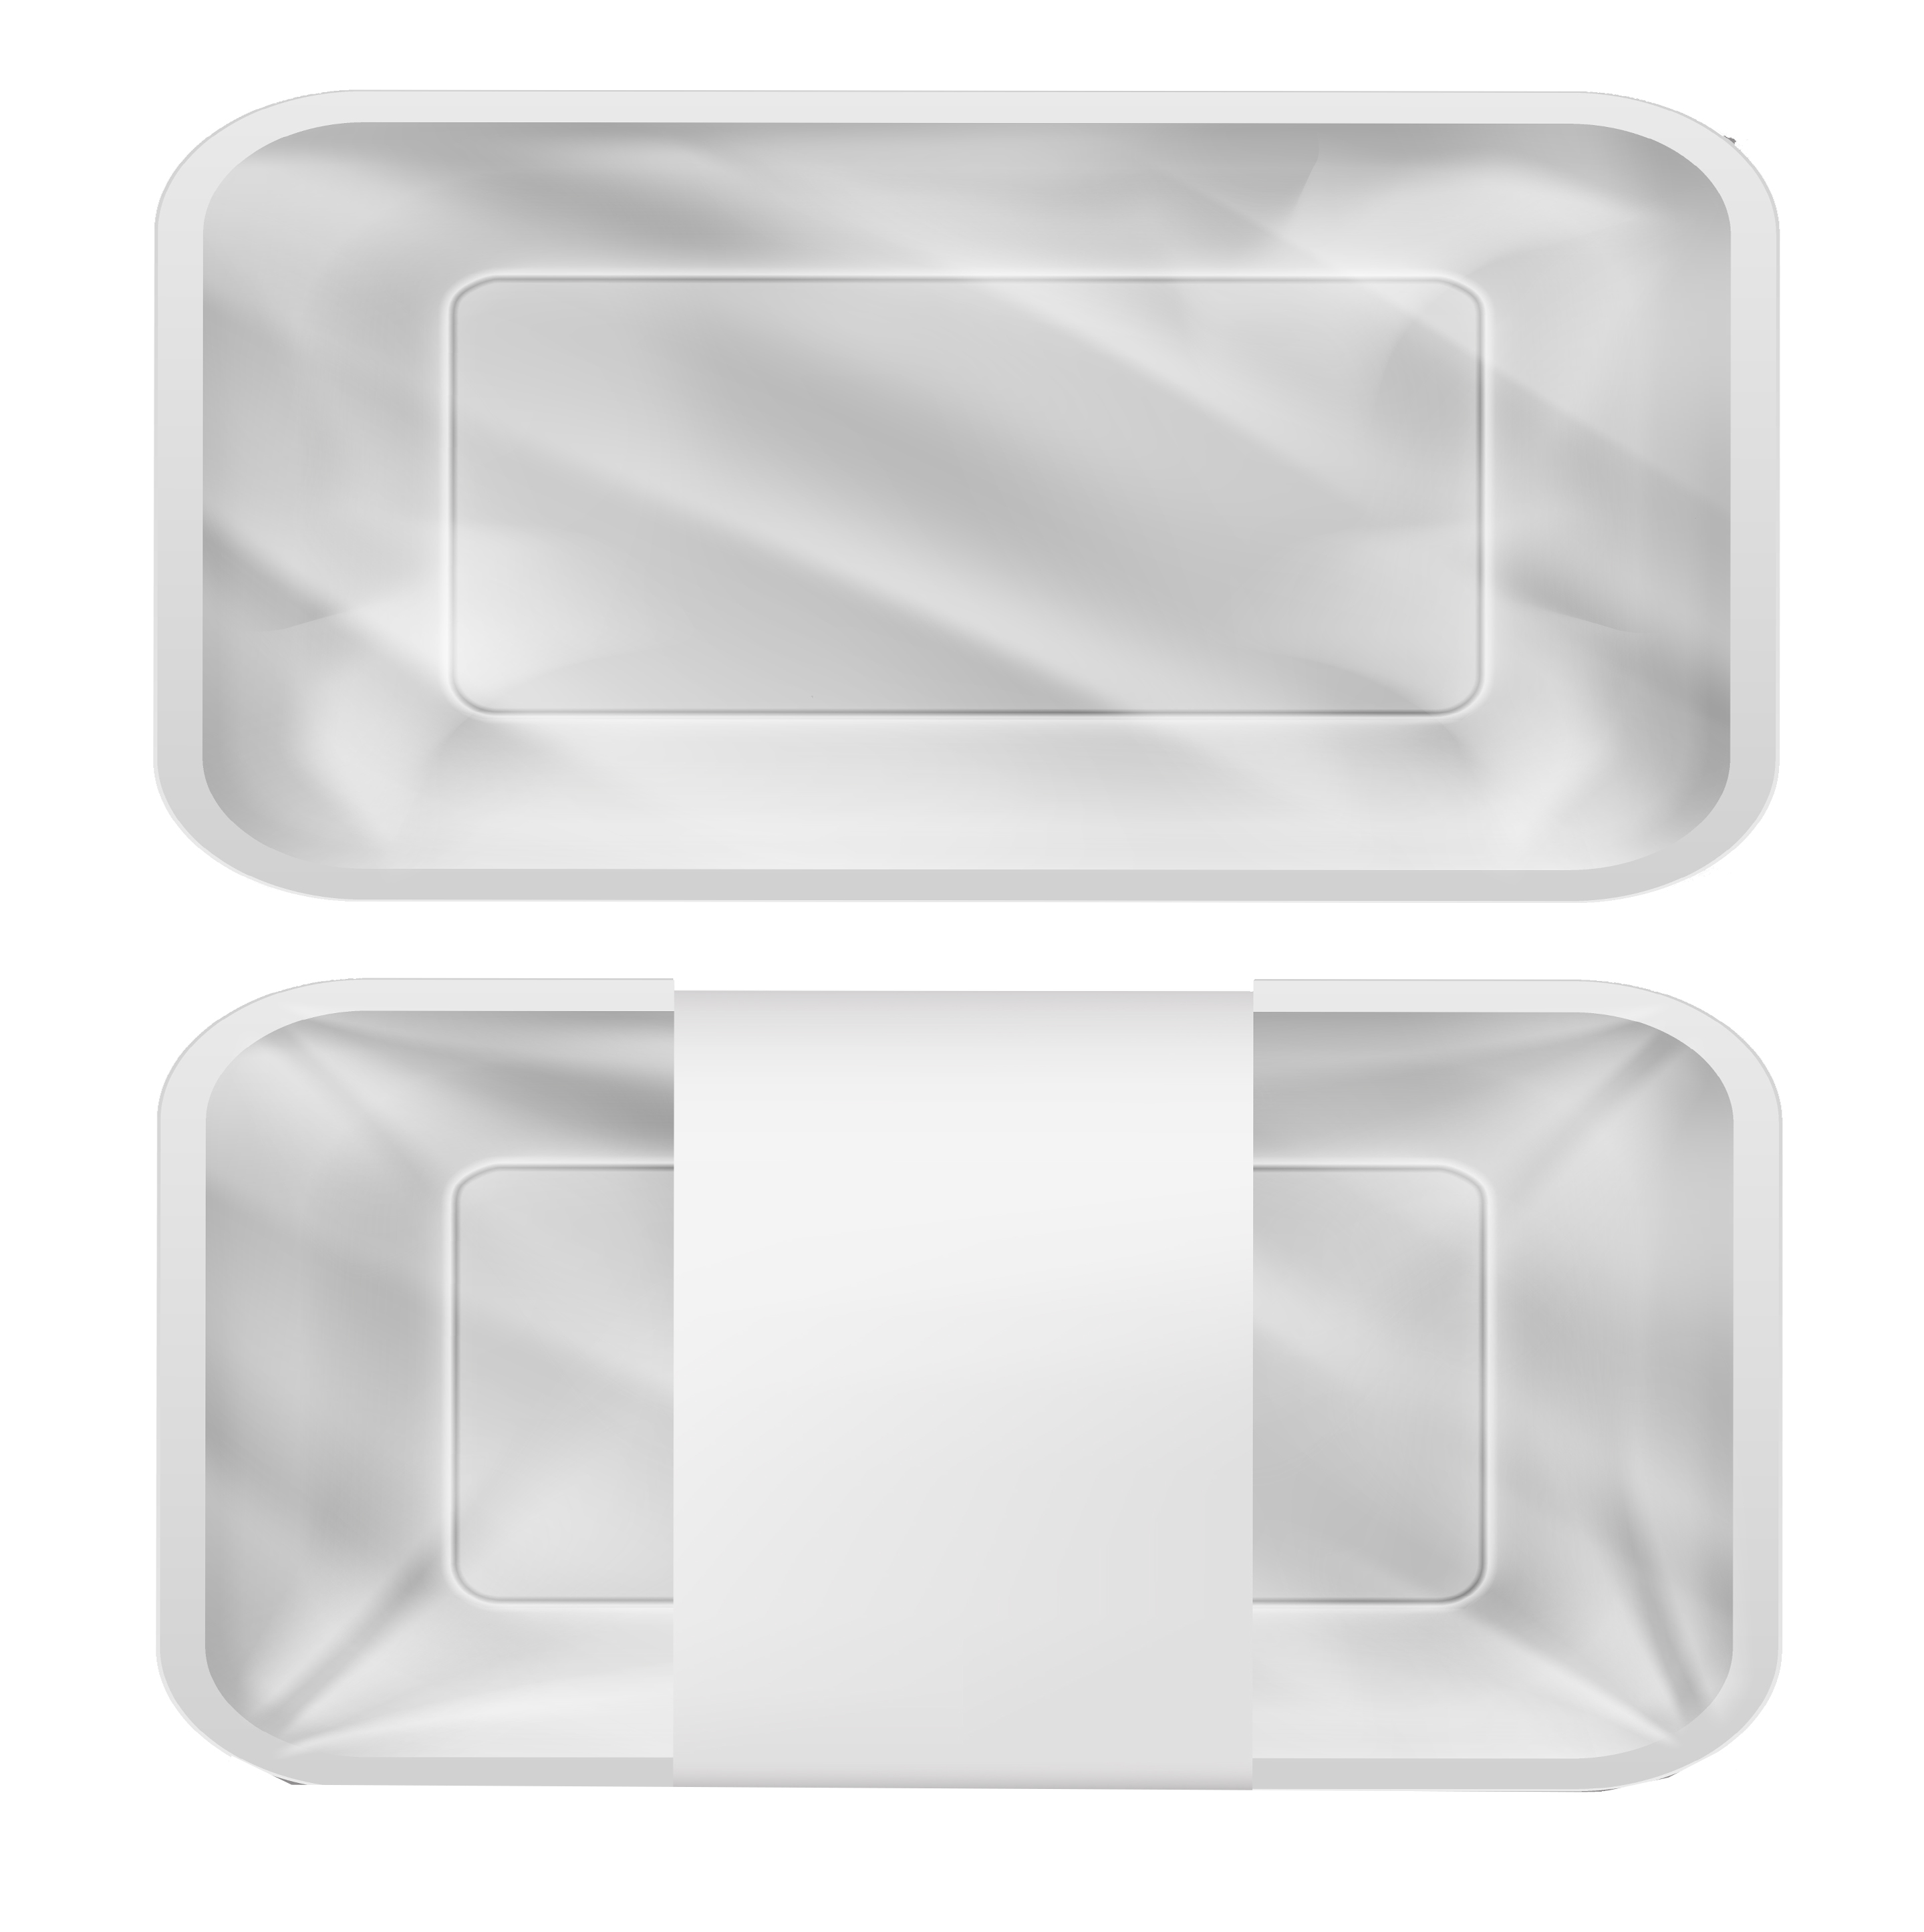 Vector 3d realistic plastic container for food, products with paper cover or plastic foil. Empty styrofoam box isolated on transparent background. Disposable packaging, kitchen or store object.